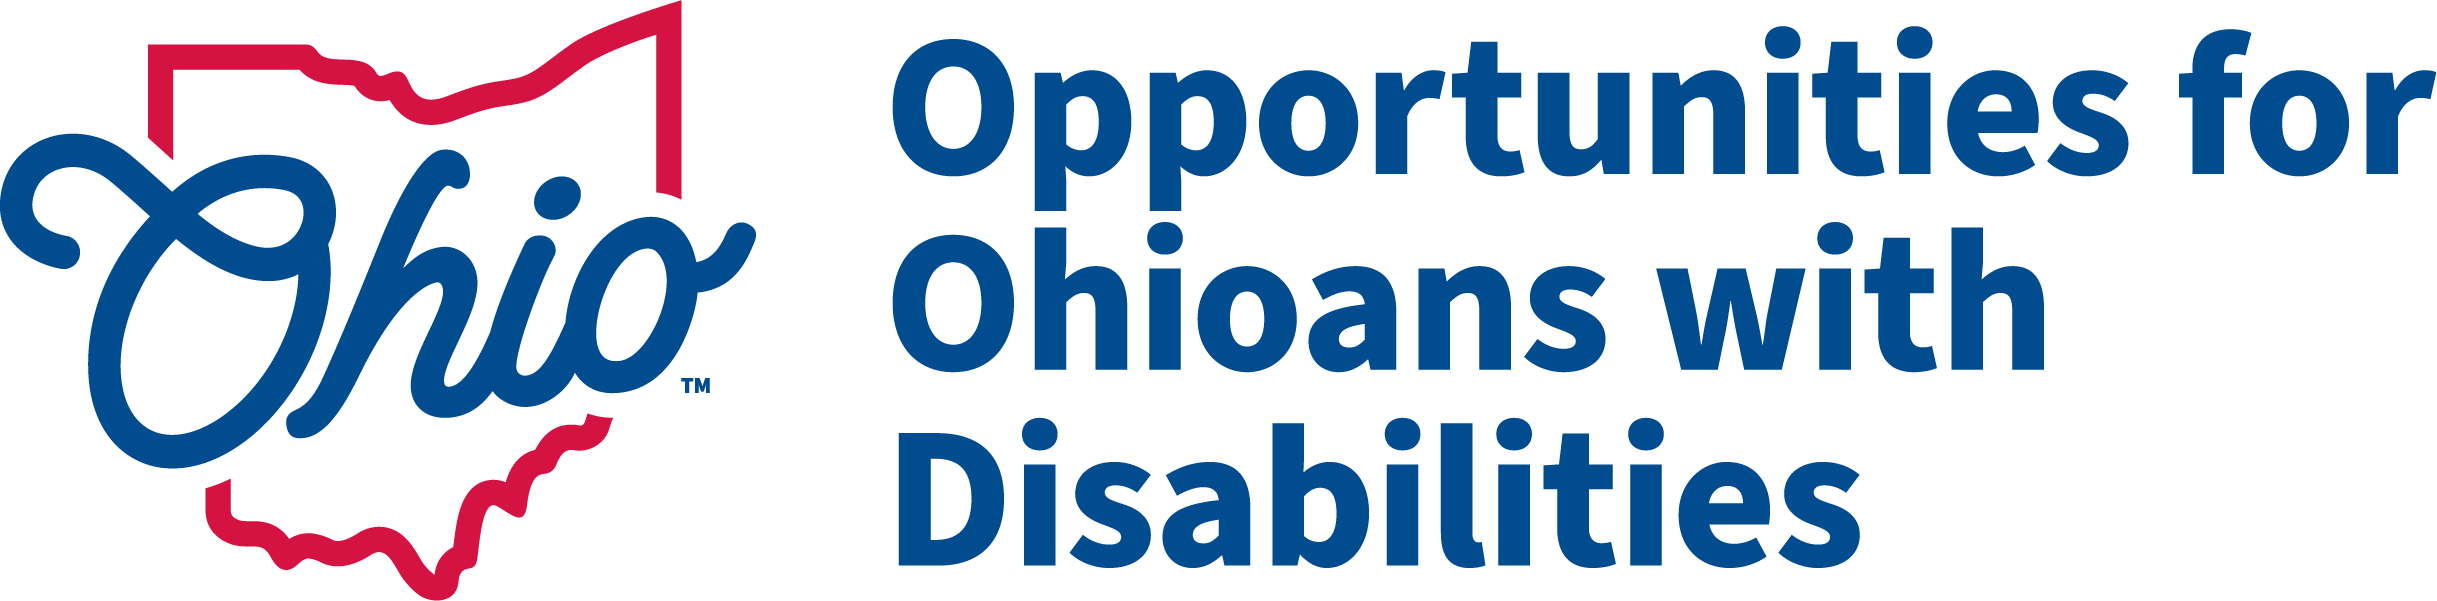 Opportunities for Ohioans with Disabilities banner image